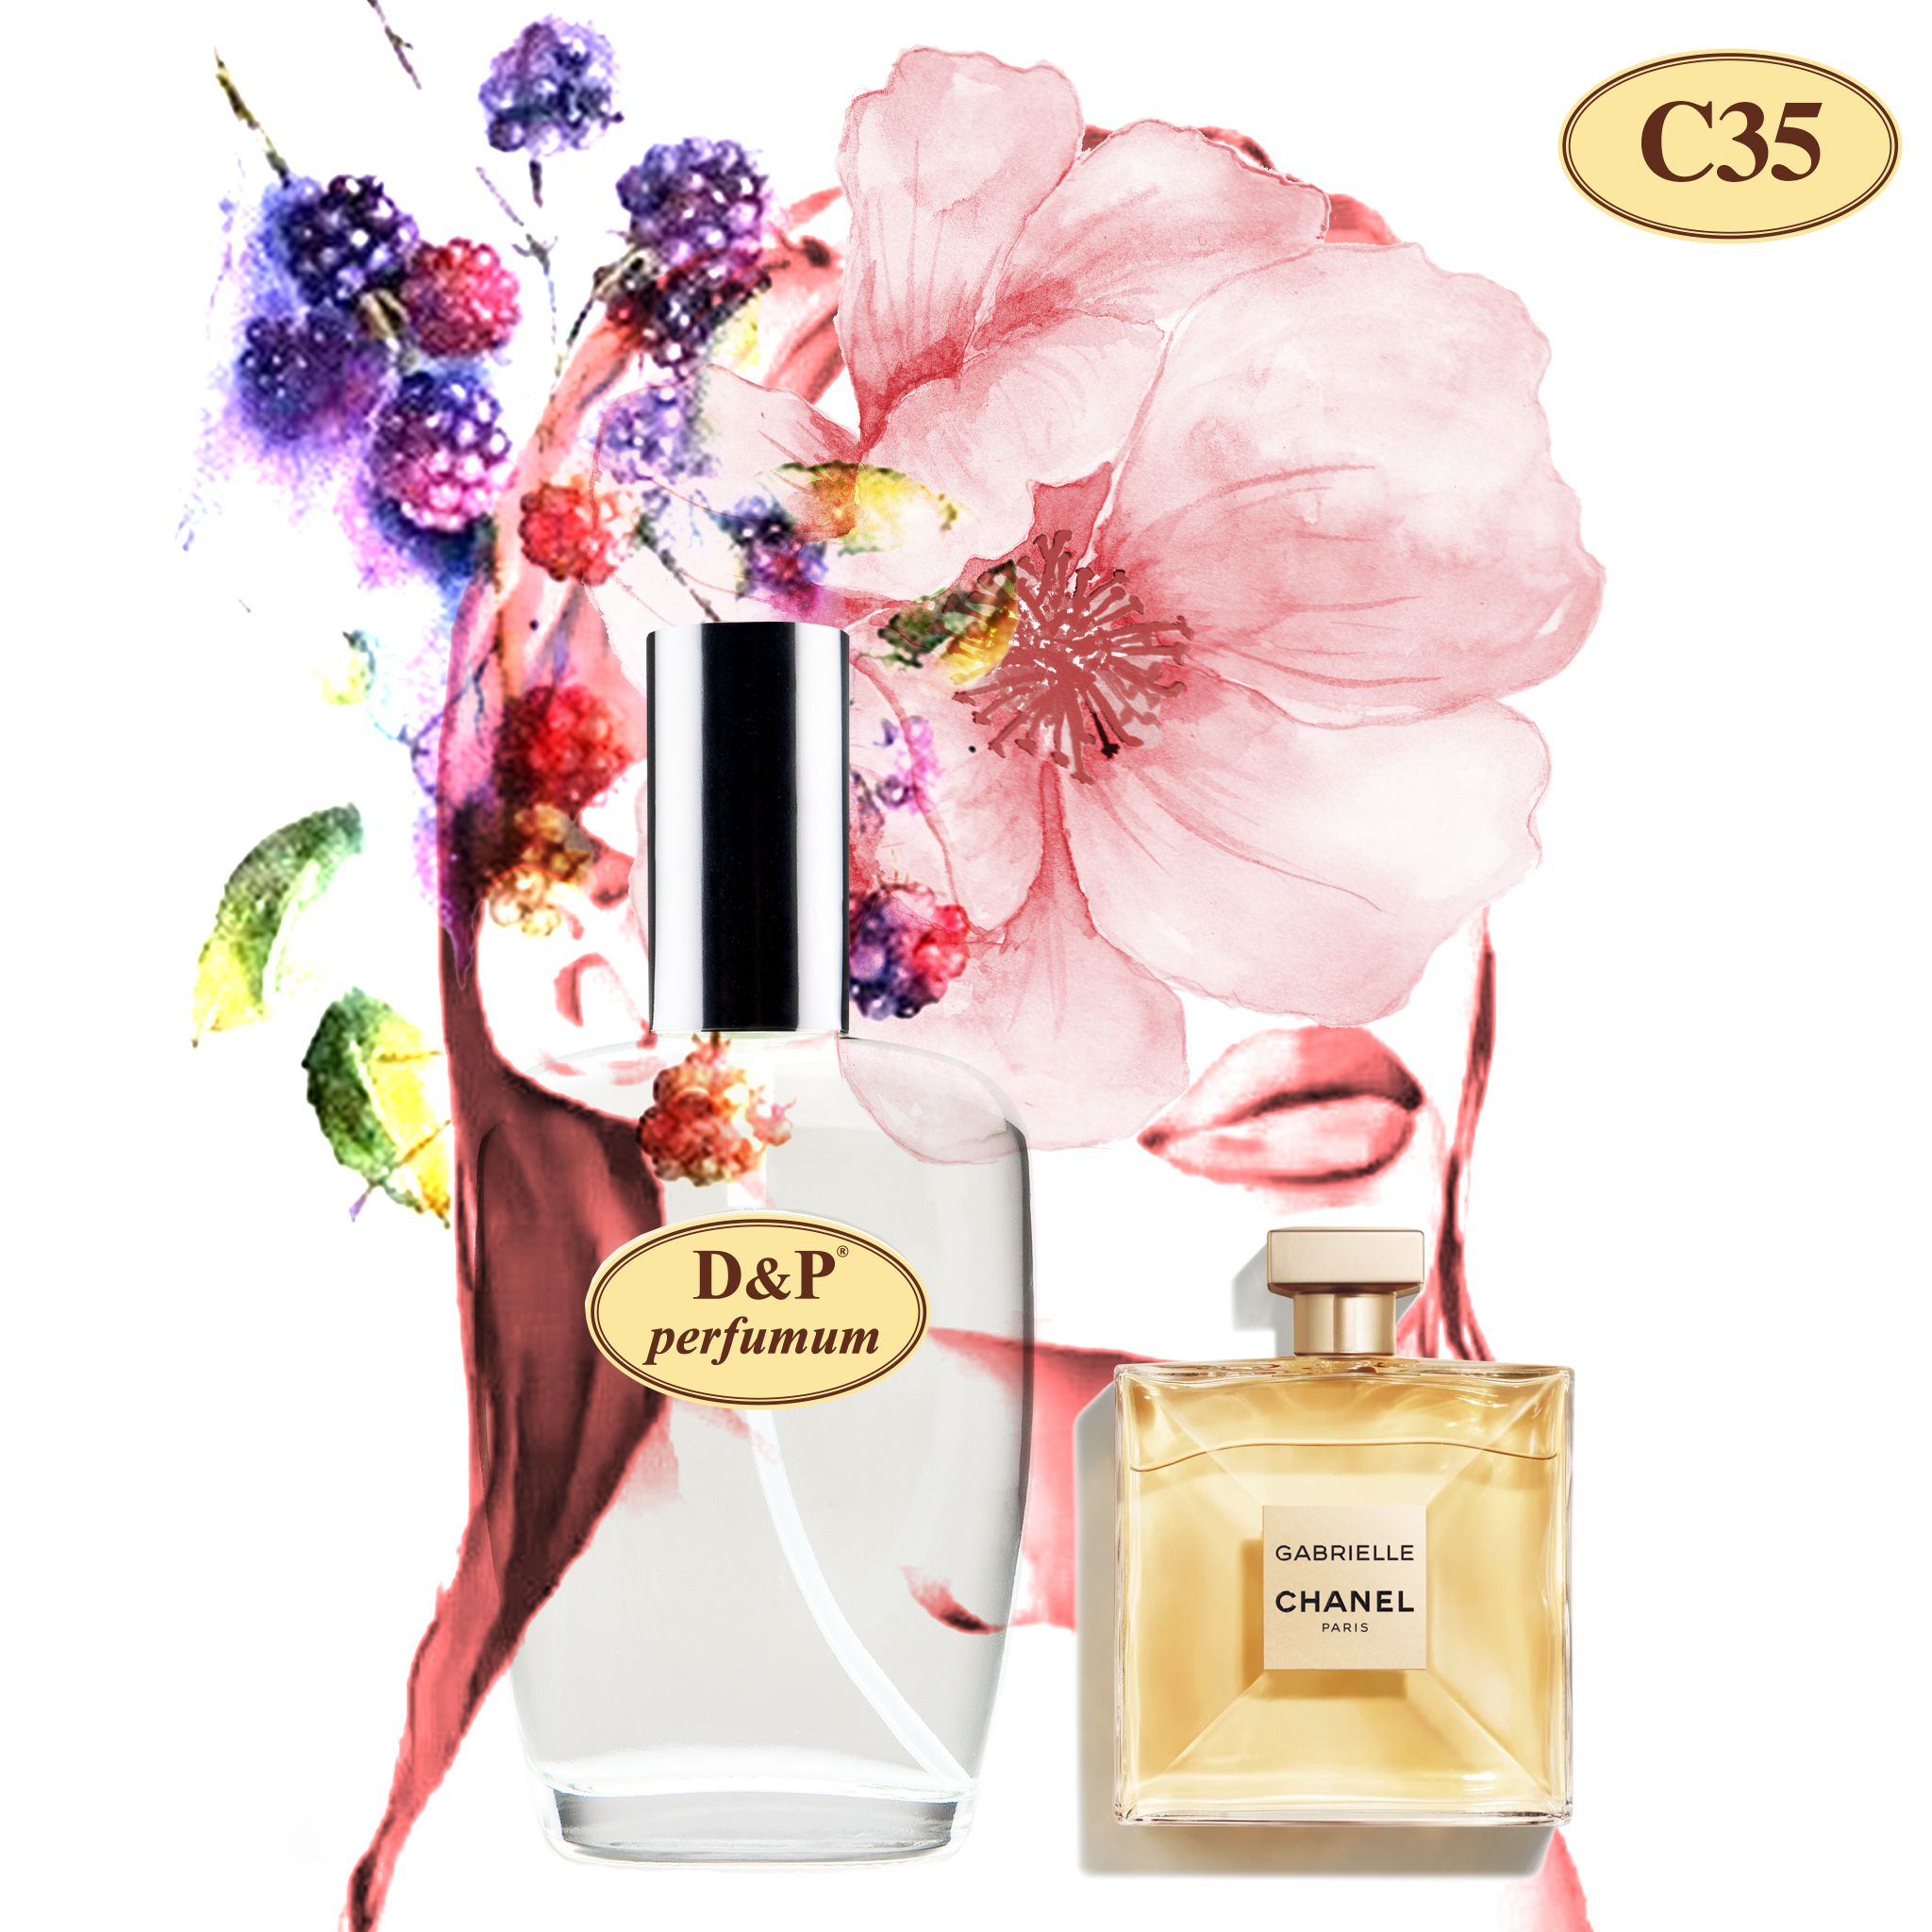 C-35 Inspired By CHANEL - GABRIELLE – D&P Perfumum